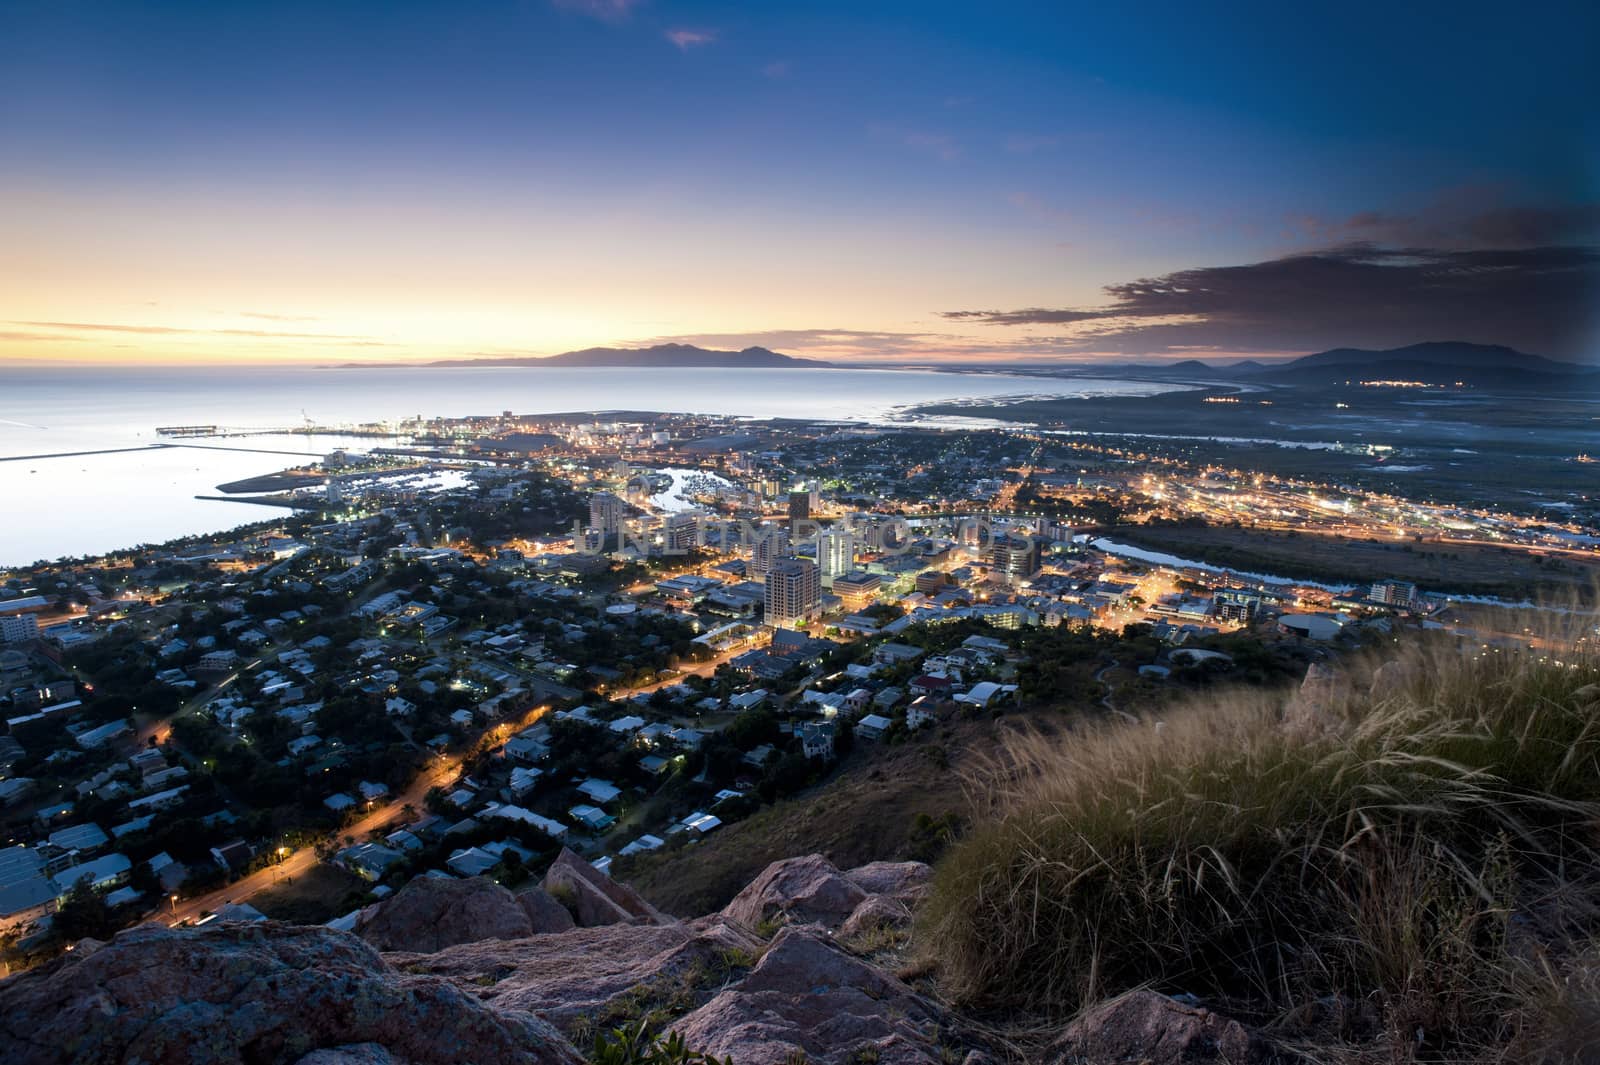 Cityscape of Townsville at dusk, Australia by stockarch